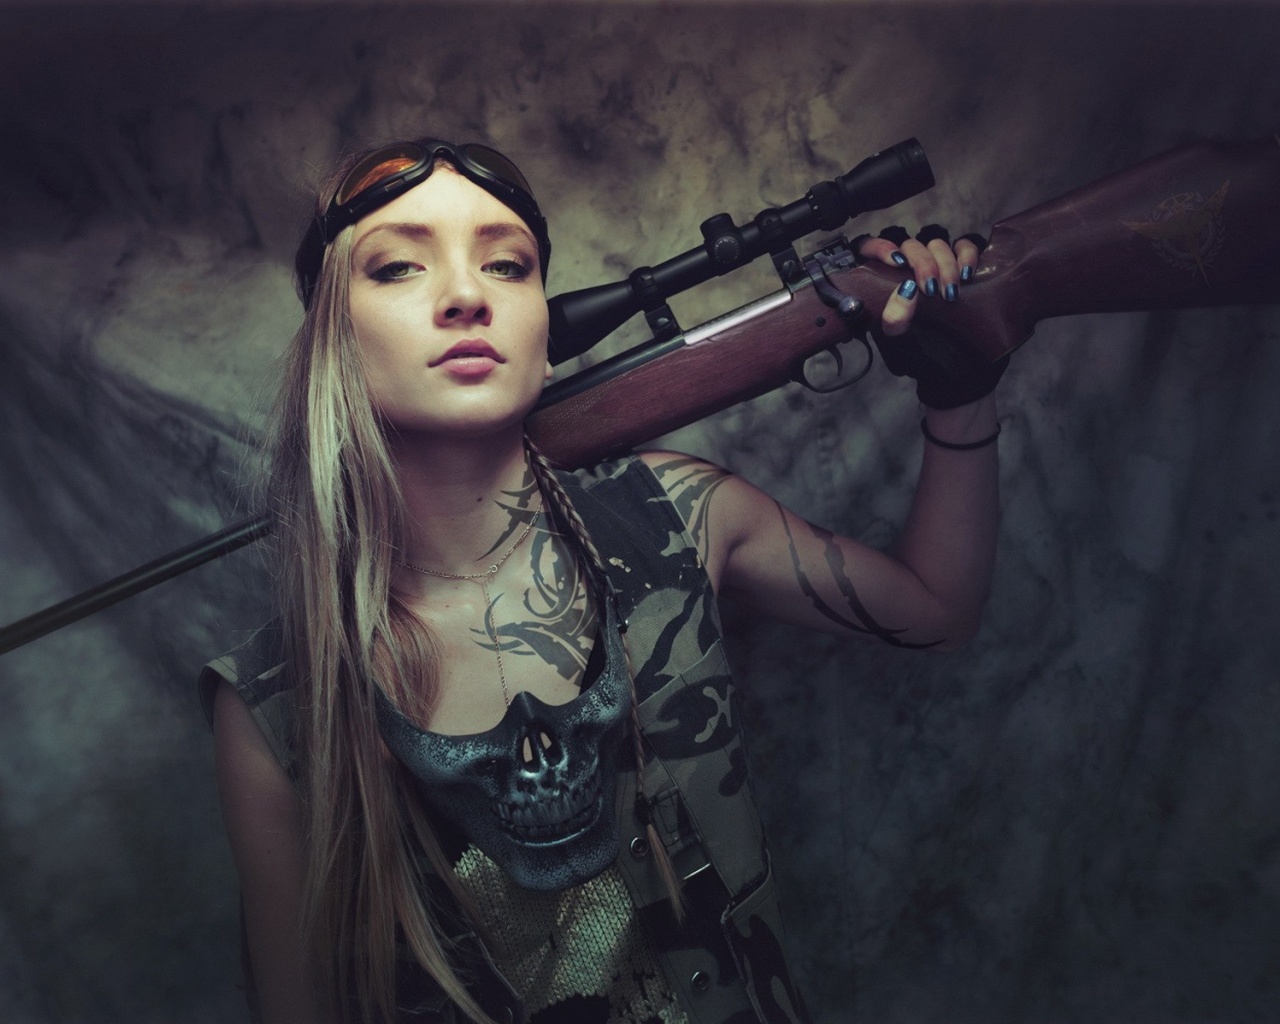 Soldier girl with a sniper rifle wallpaper 1280x1024